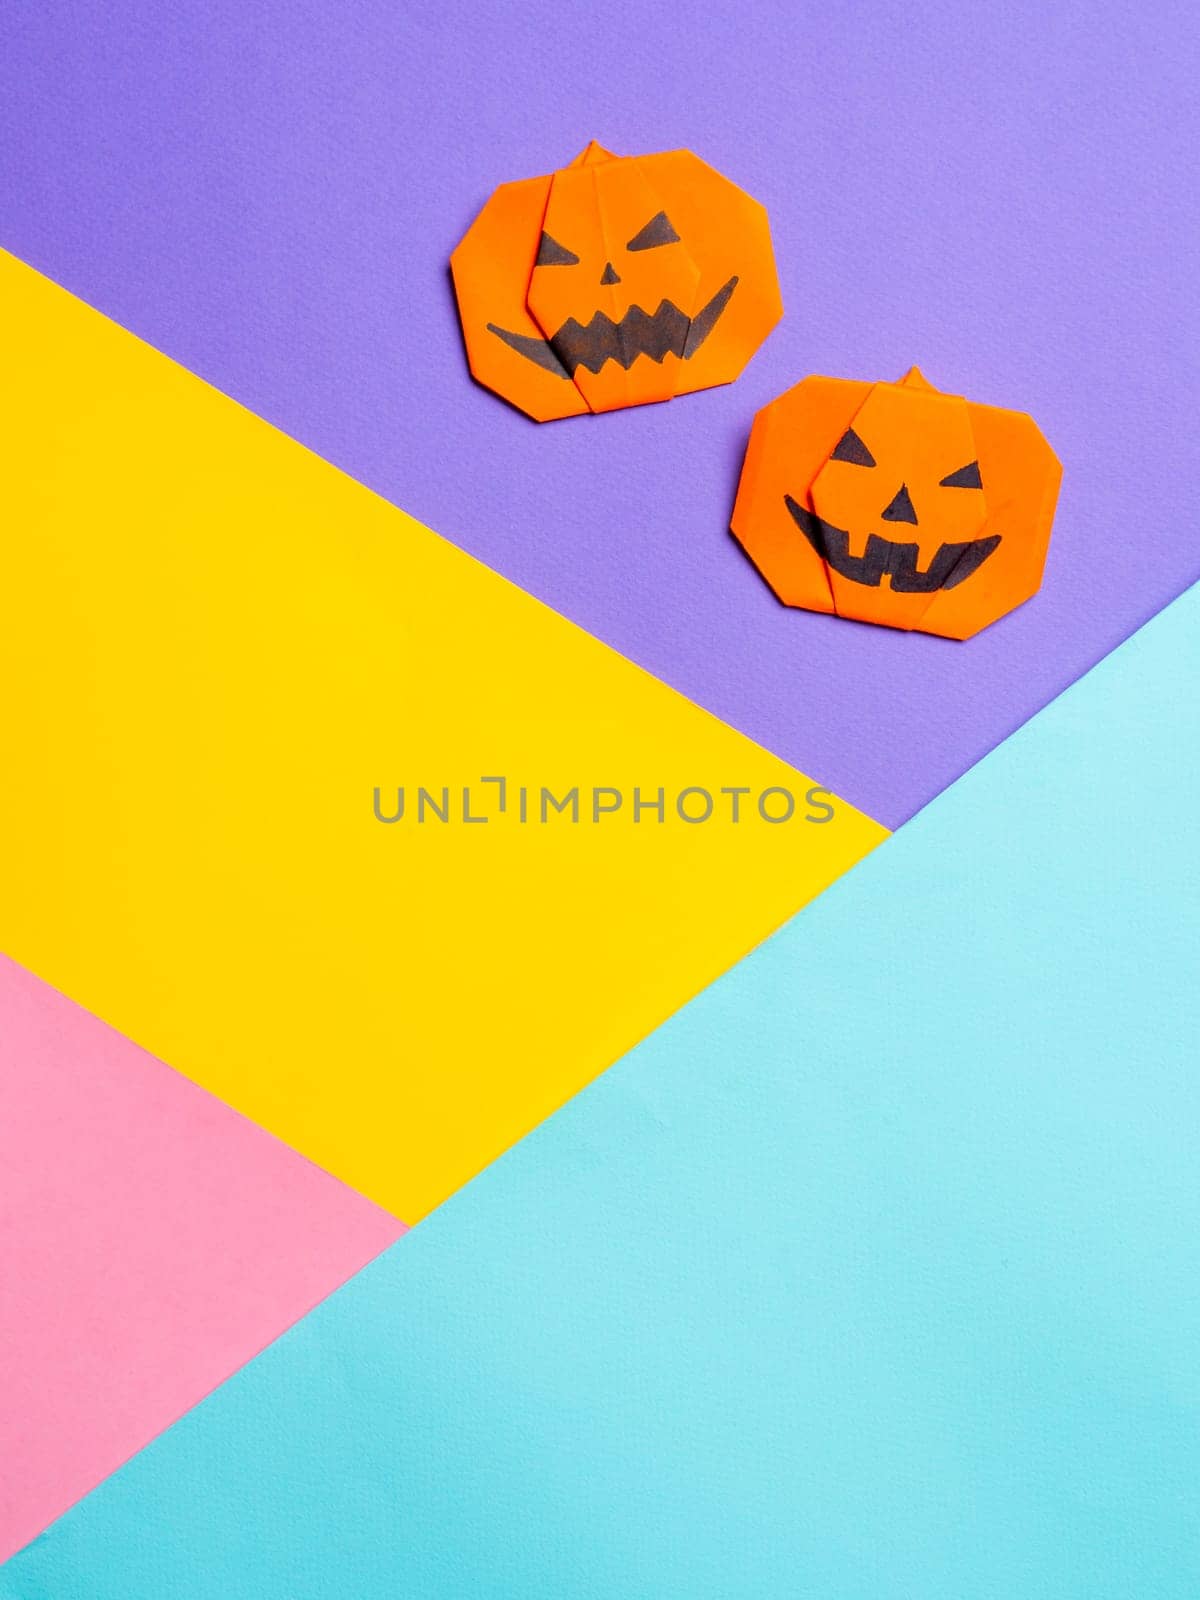 Halloween concept. Paper origami pumpkin on colorful background. Simple idea for halloween - easy made paper pumpkins on multicolor blue, yellow, pink, lilac background. Copy space for text. Vertical